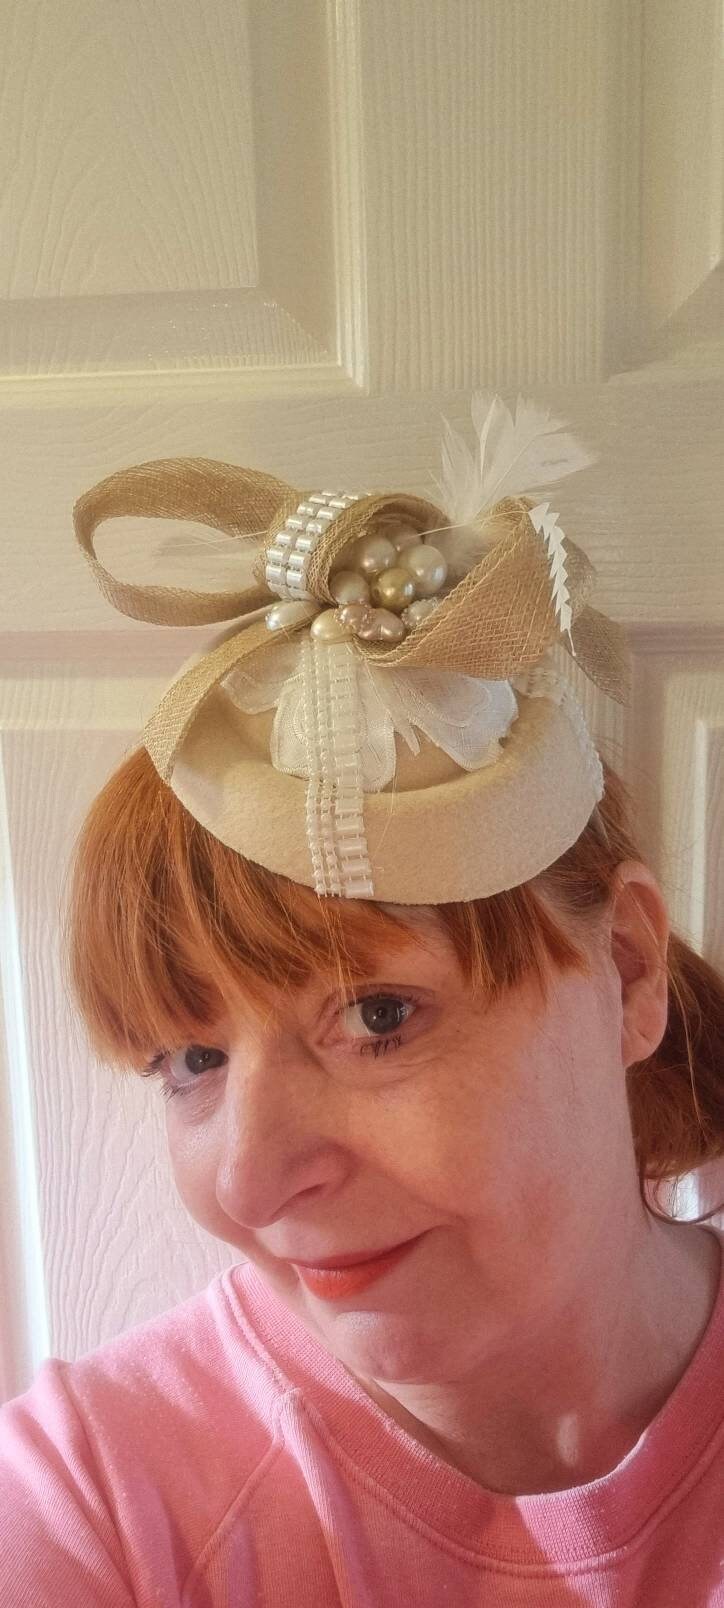 Cream ivory pillbox hat Fascinator wool pearl percher feathers Vintage style occasionwear hatinator races wedding womens accessories